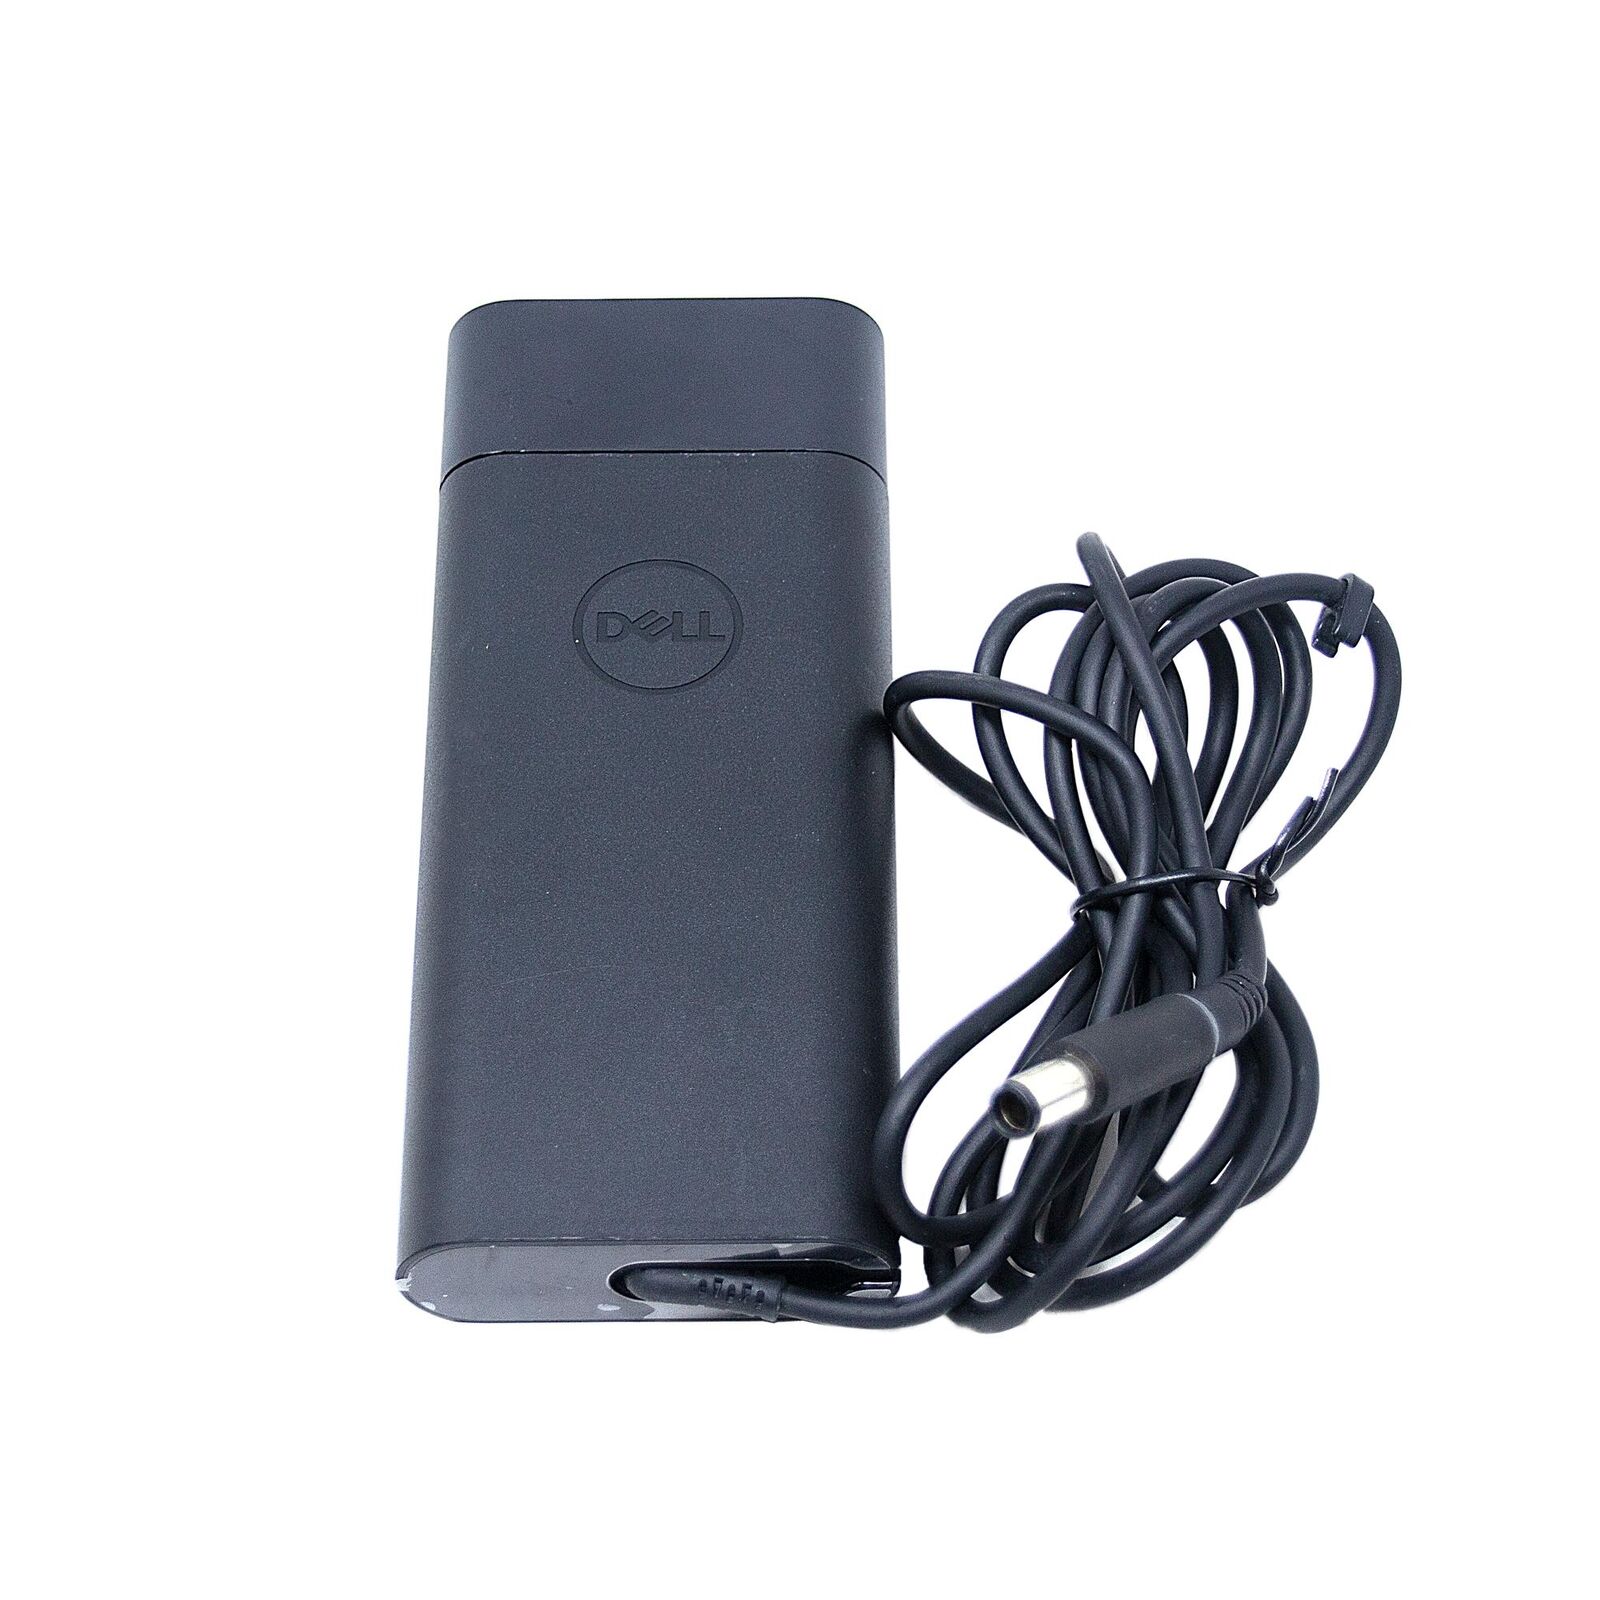 DELL Studio 15 1558 PP39L 90W Genuine Original AC Power Adapter Charger